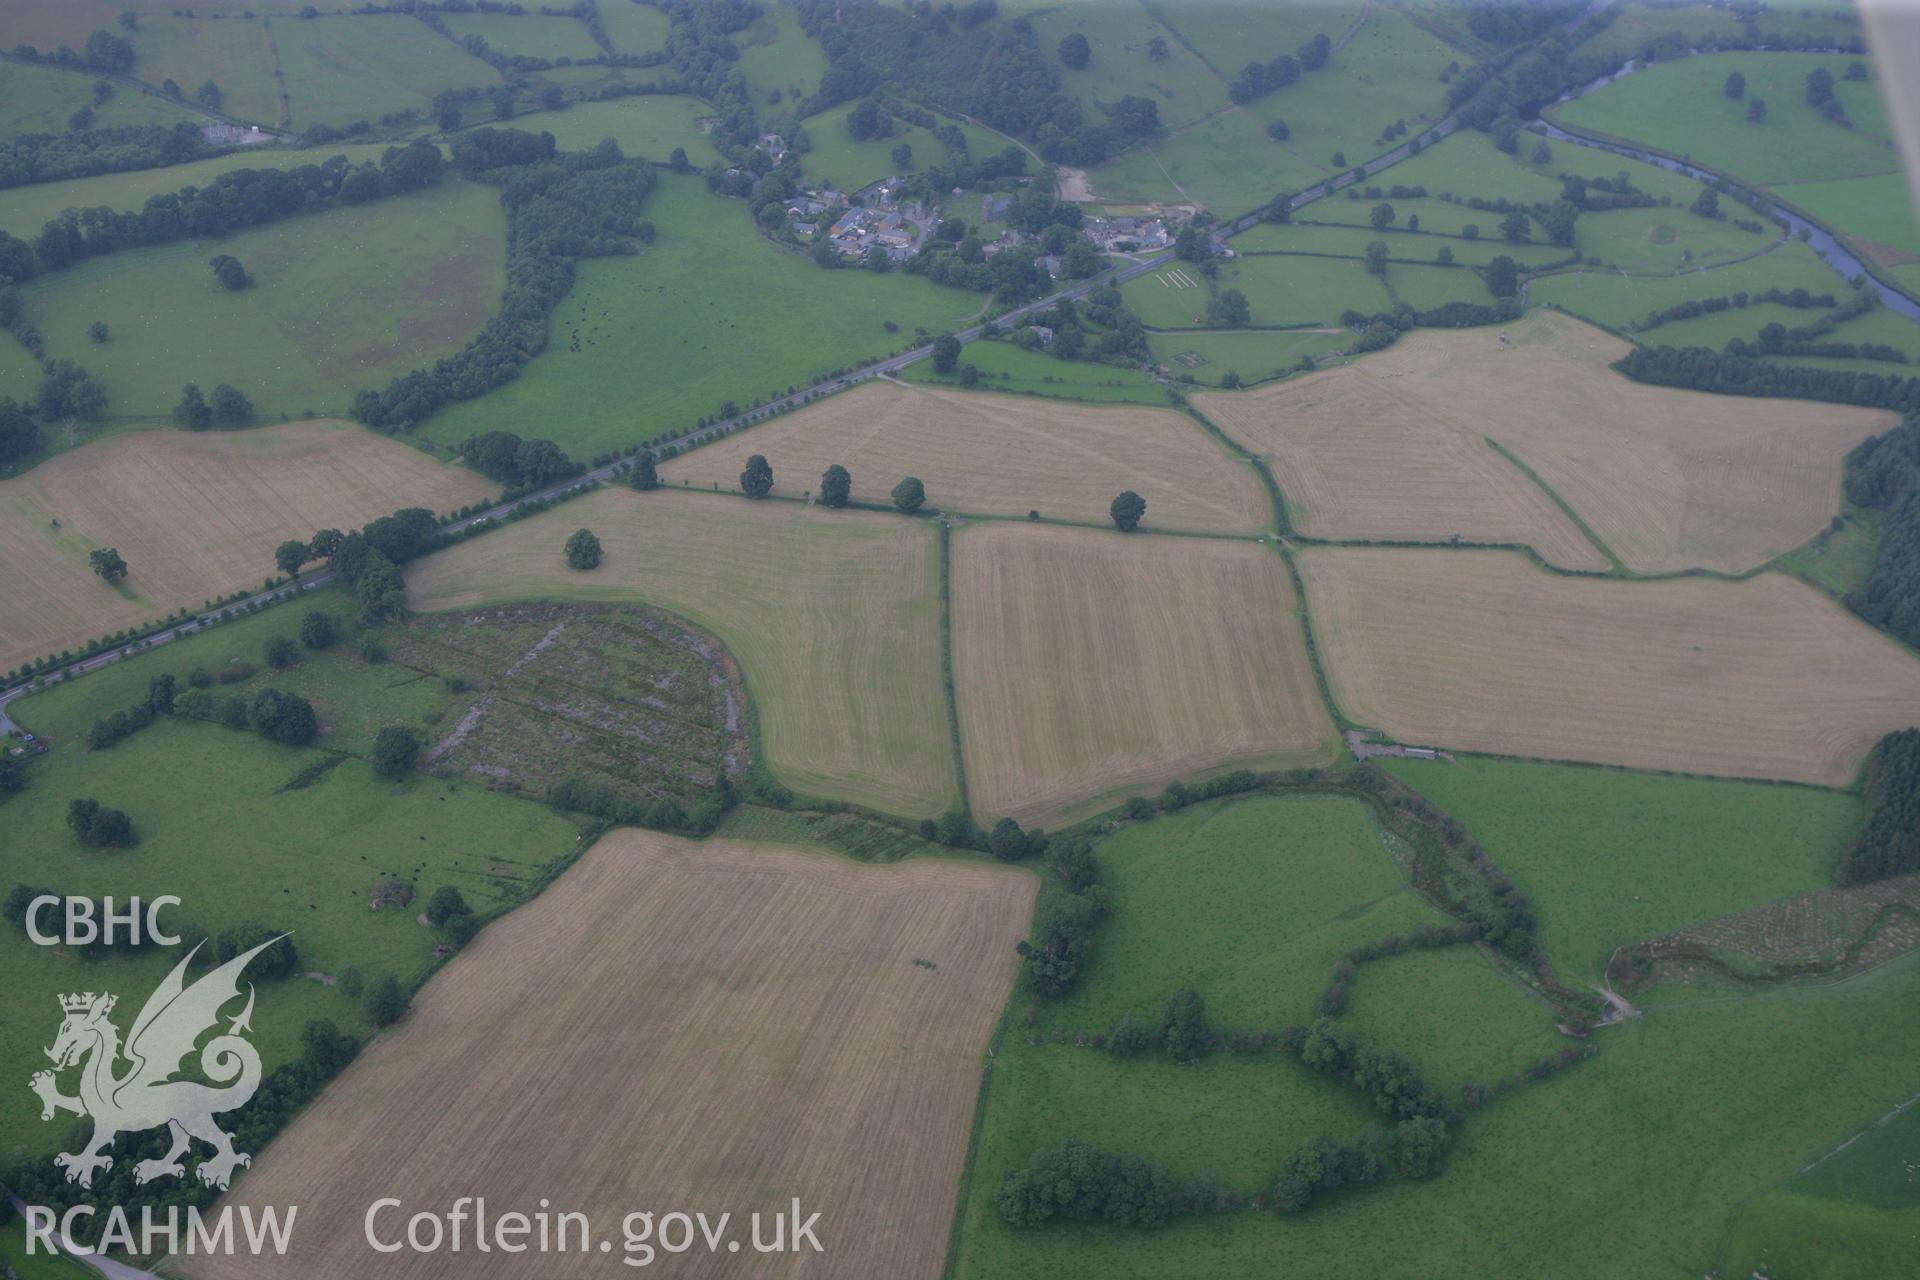 RCAHMW colour oblique photograph of Llanfor Roman Military Complex. Taken by Toby Driver on 24/07/2008.